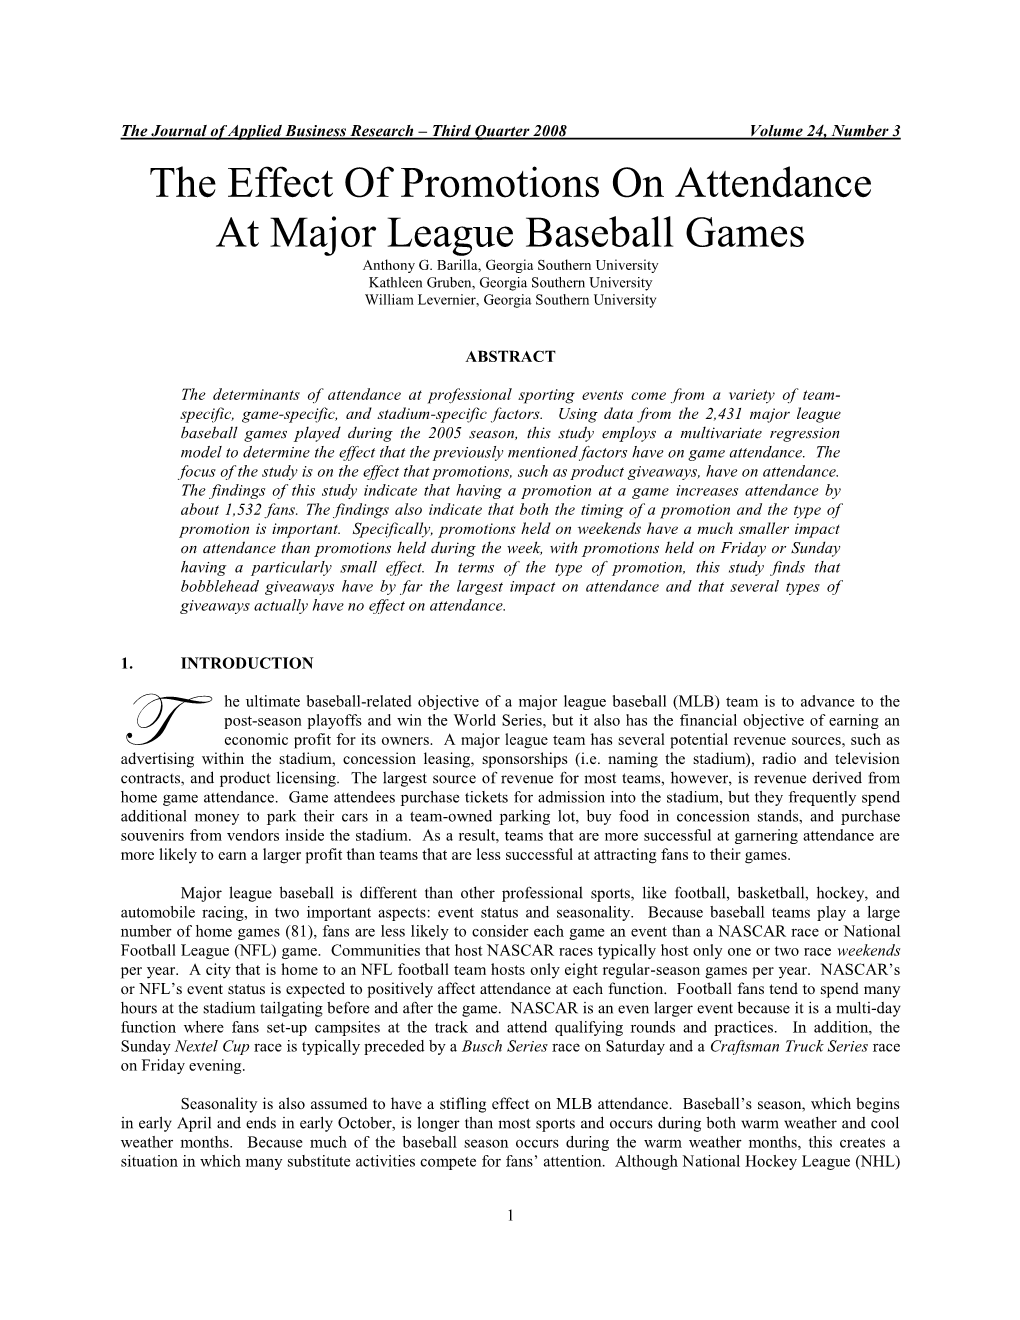 Attendance at Major League Baseball Games Is a Major Determinant of The